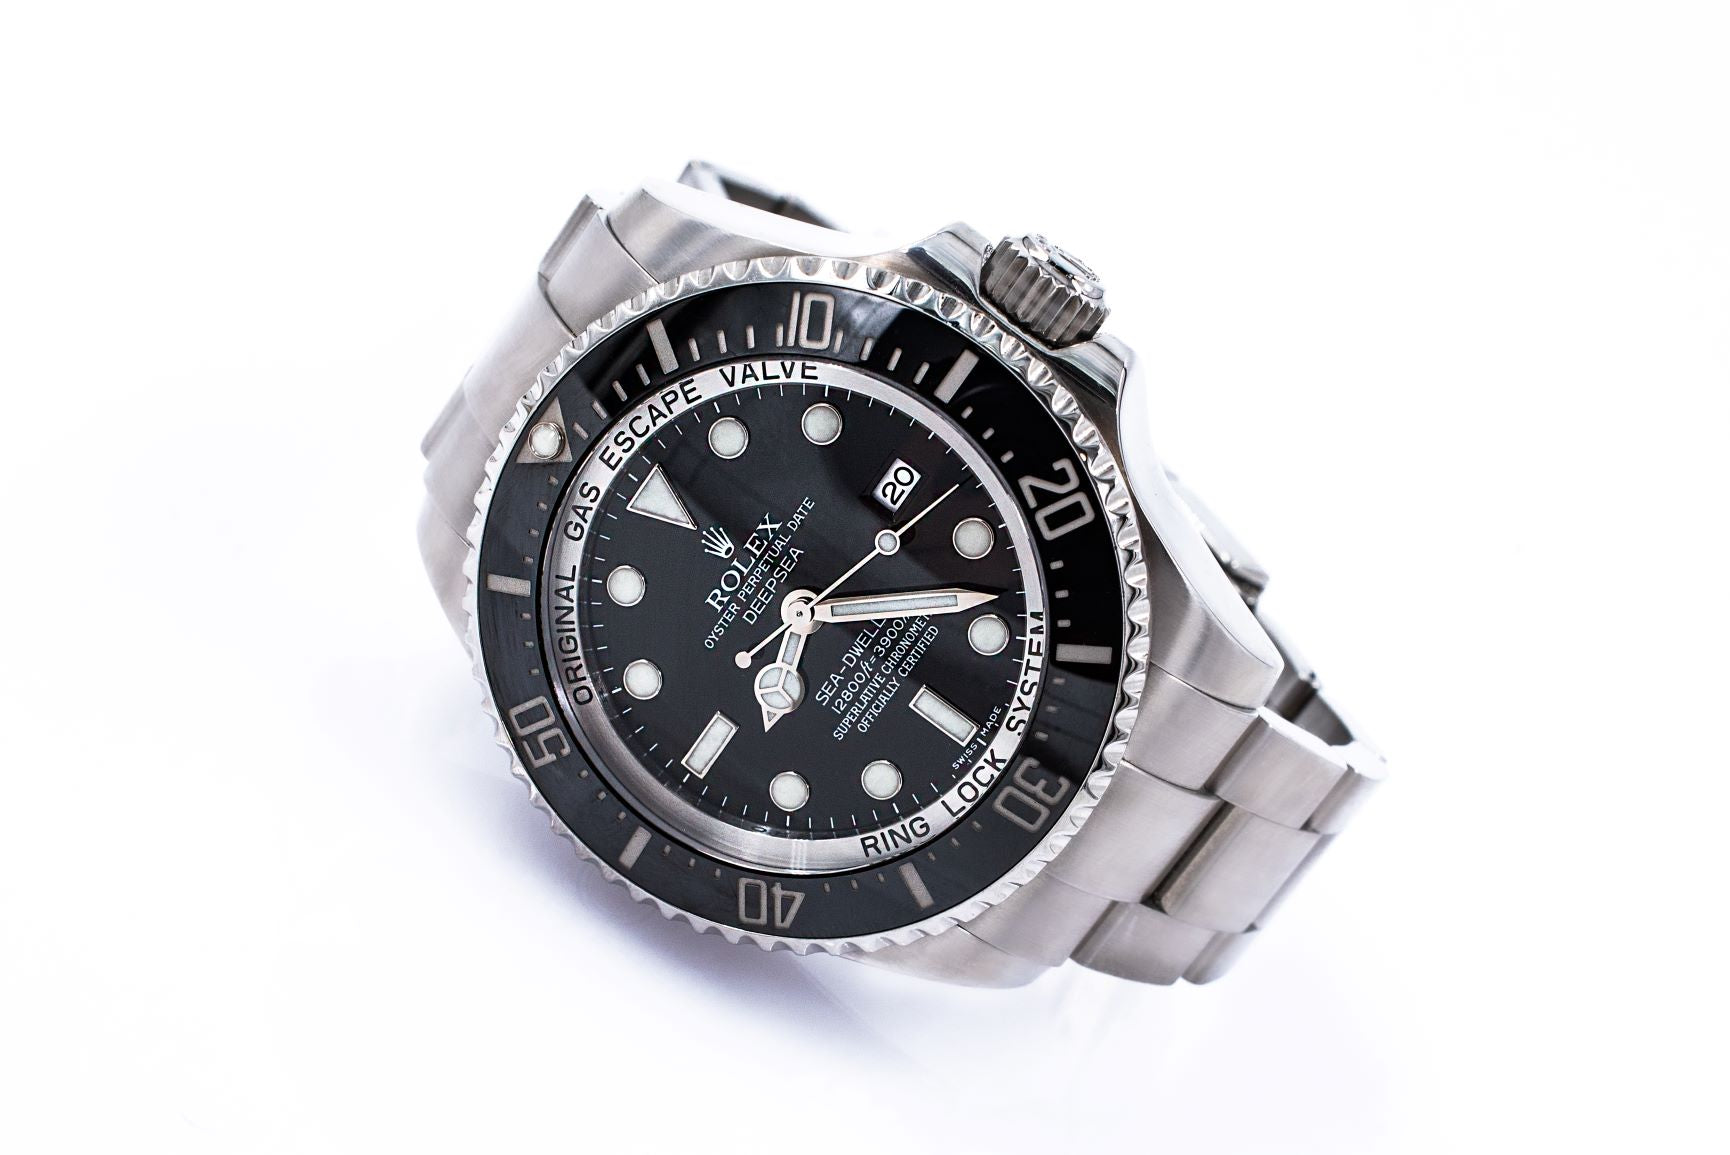 Stainless Steel Deep Sea Diver's Watch